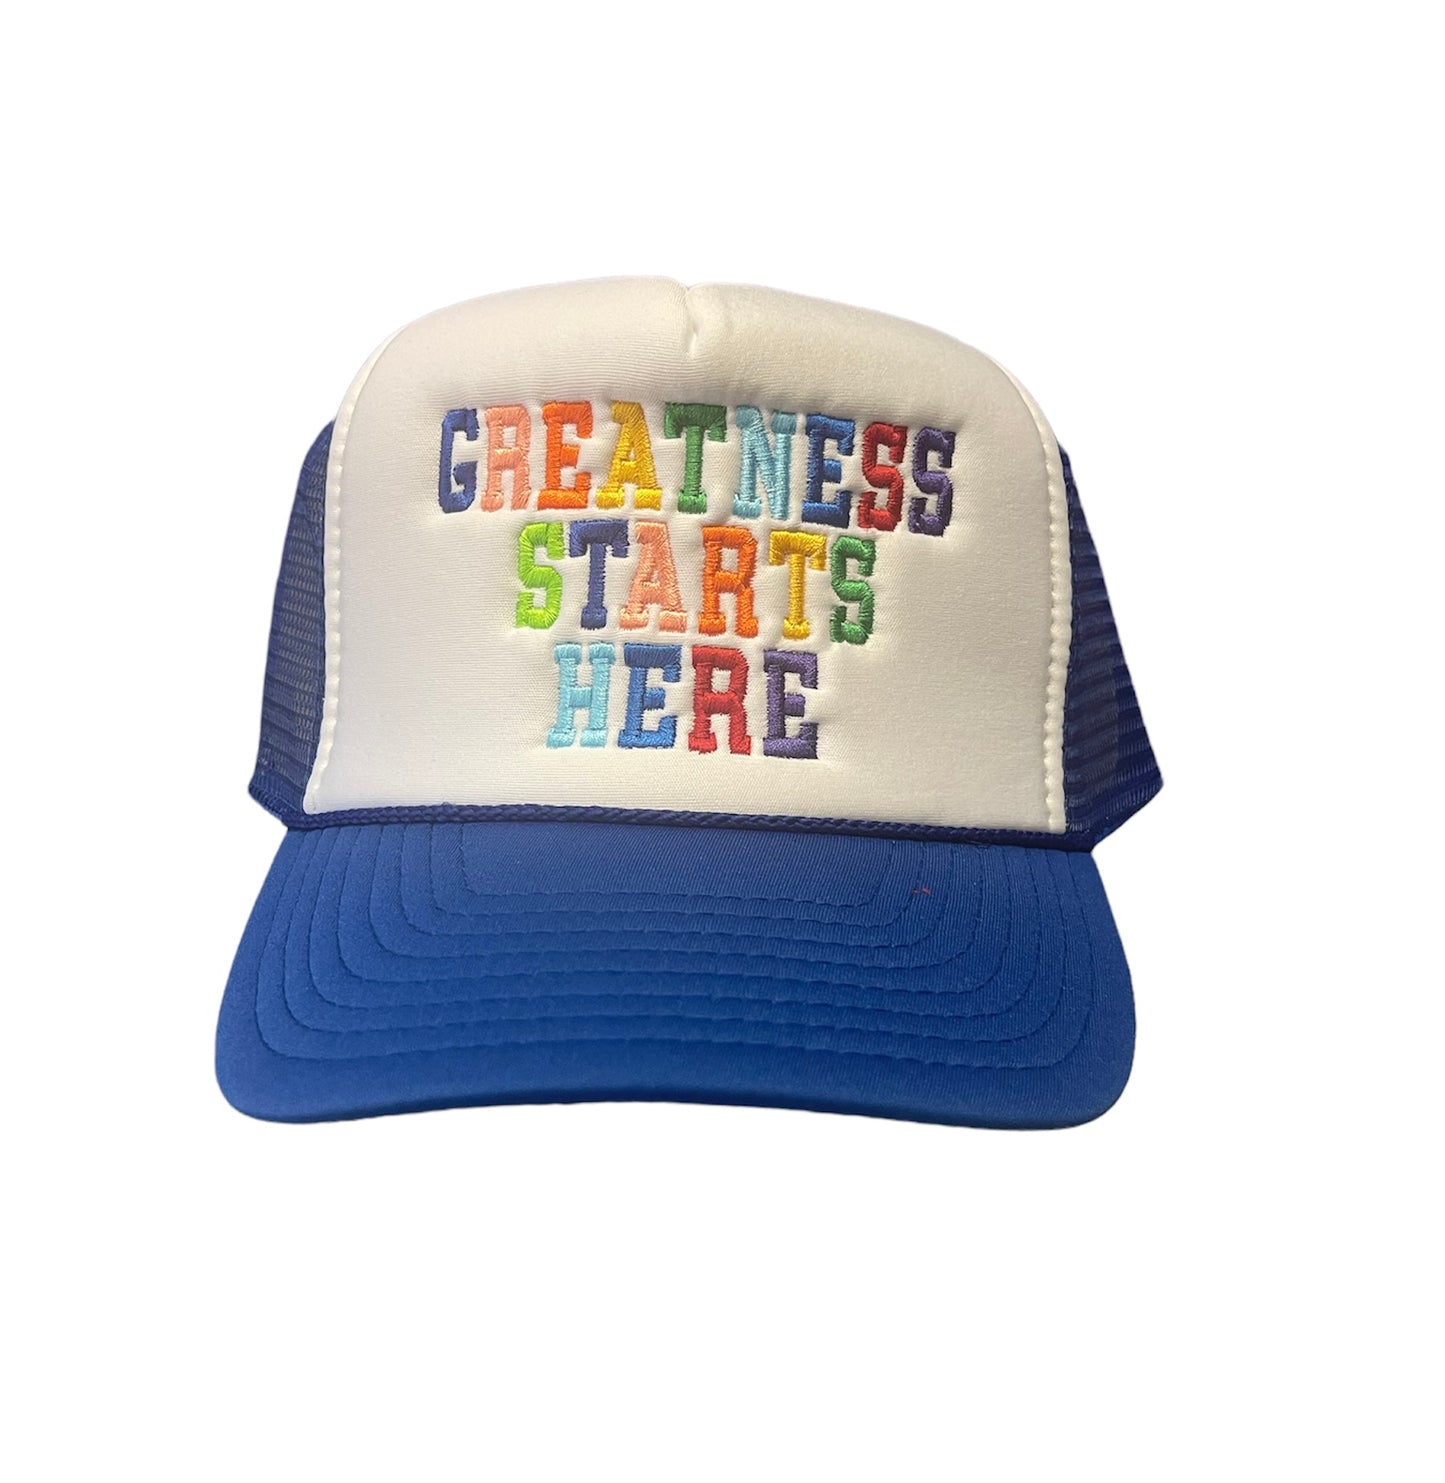 Greatness Starts Here Truck Cap in Blue and White